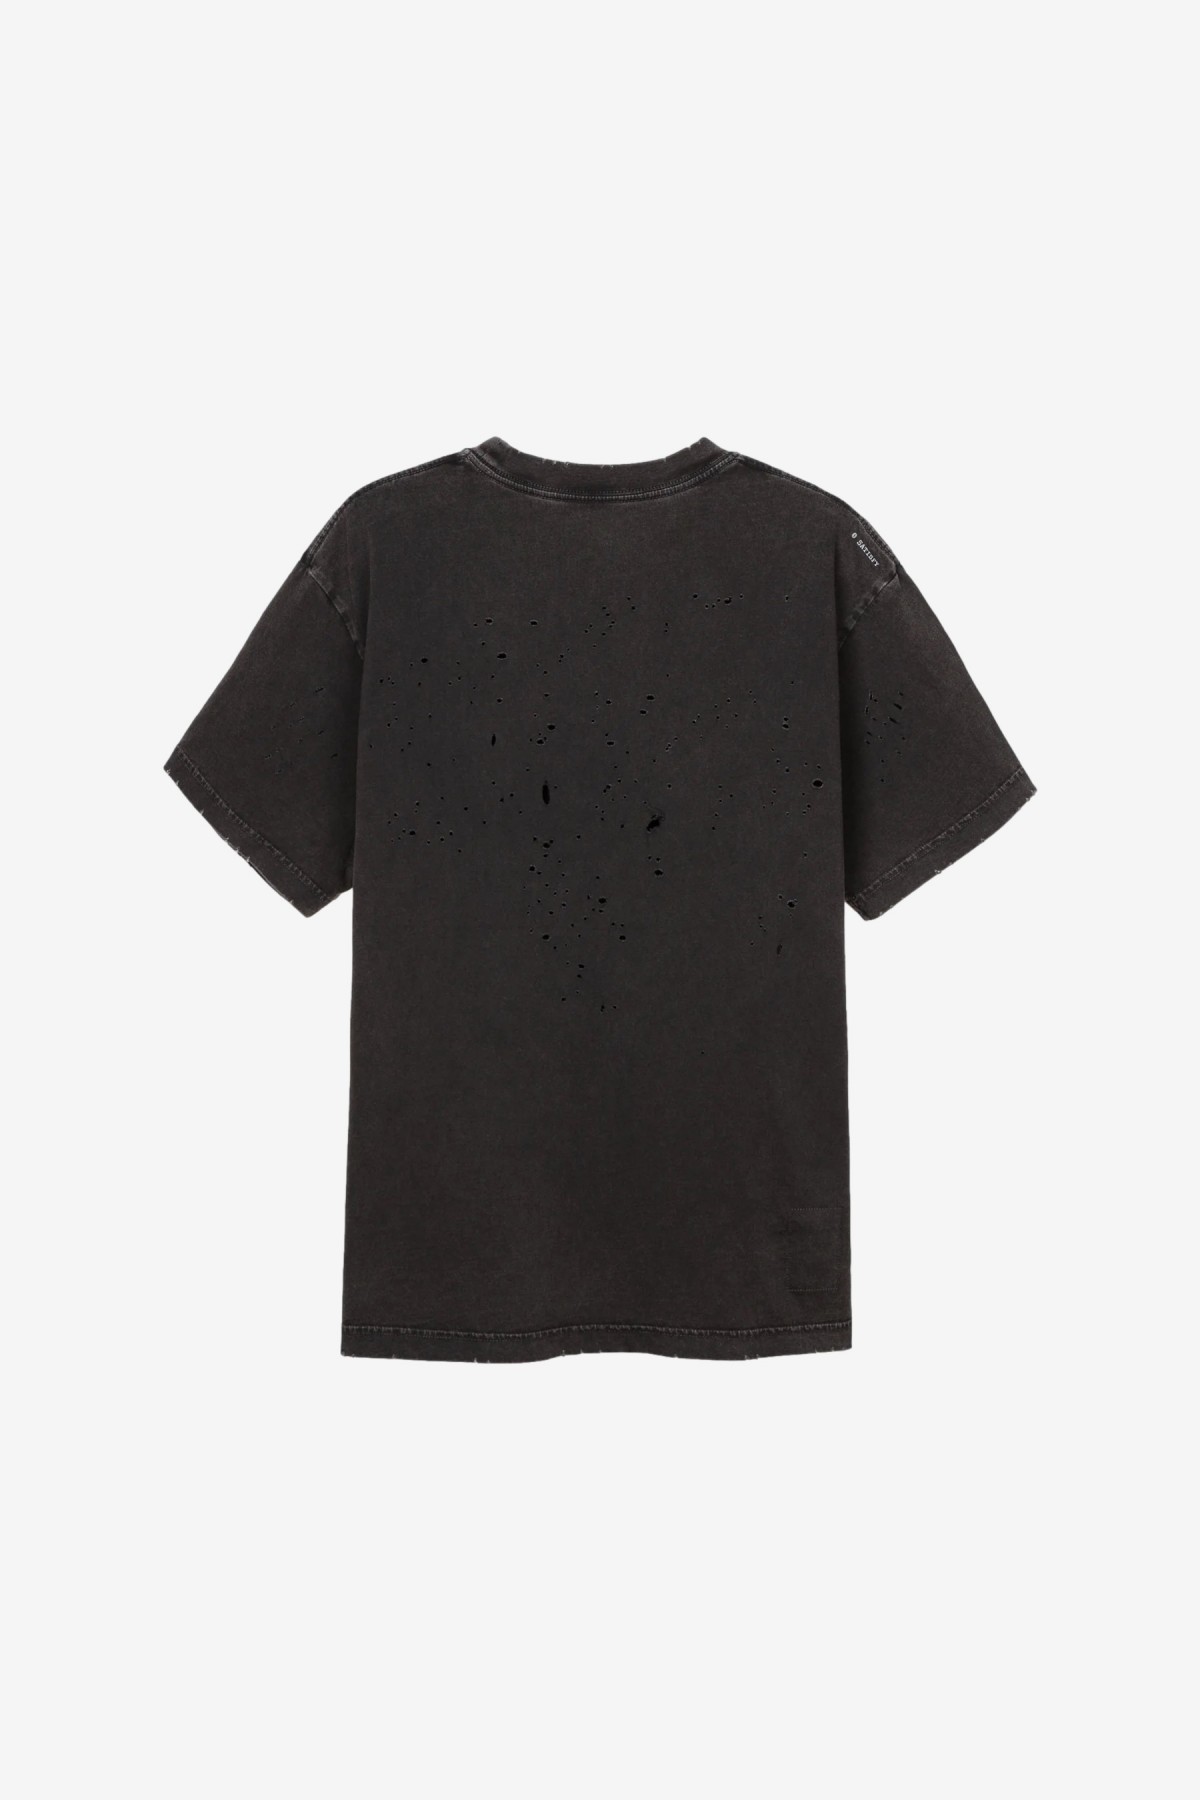 MothTech T-Shirt in Aged Black - Satisfy | Afura Store